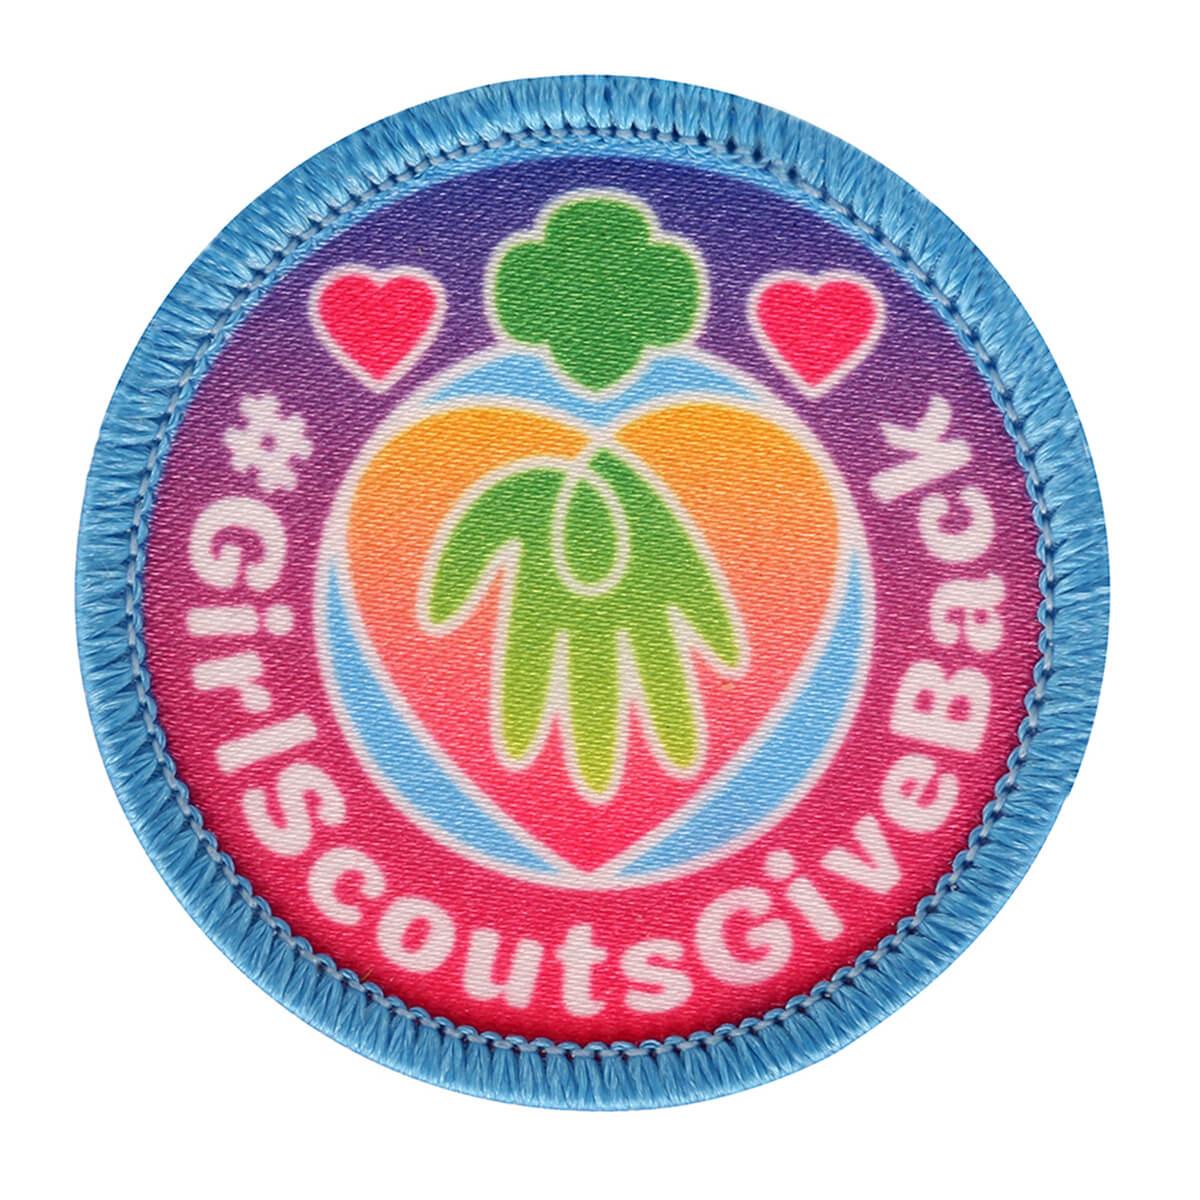 How to Easily Attach Girl Scout Patches